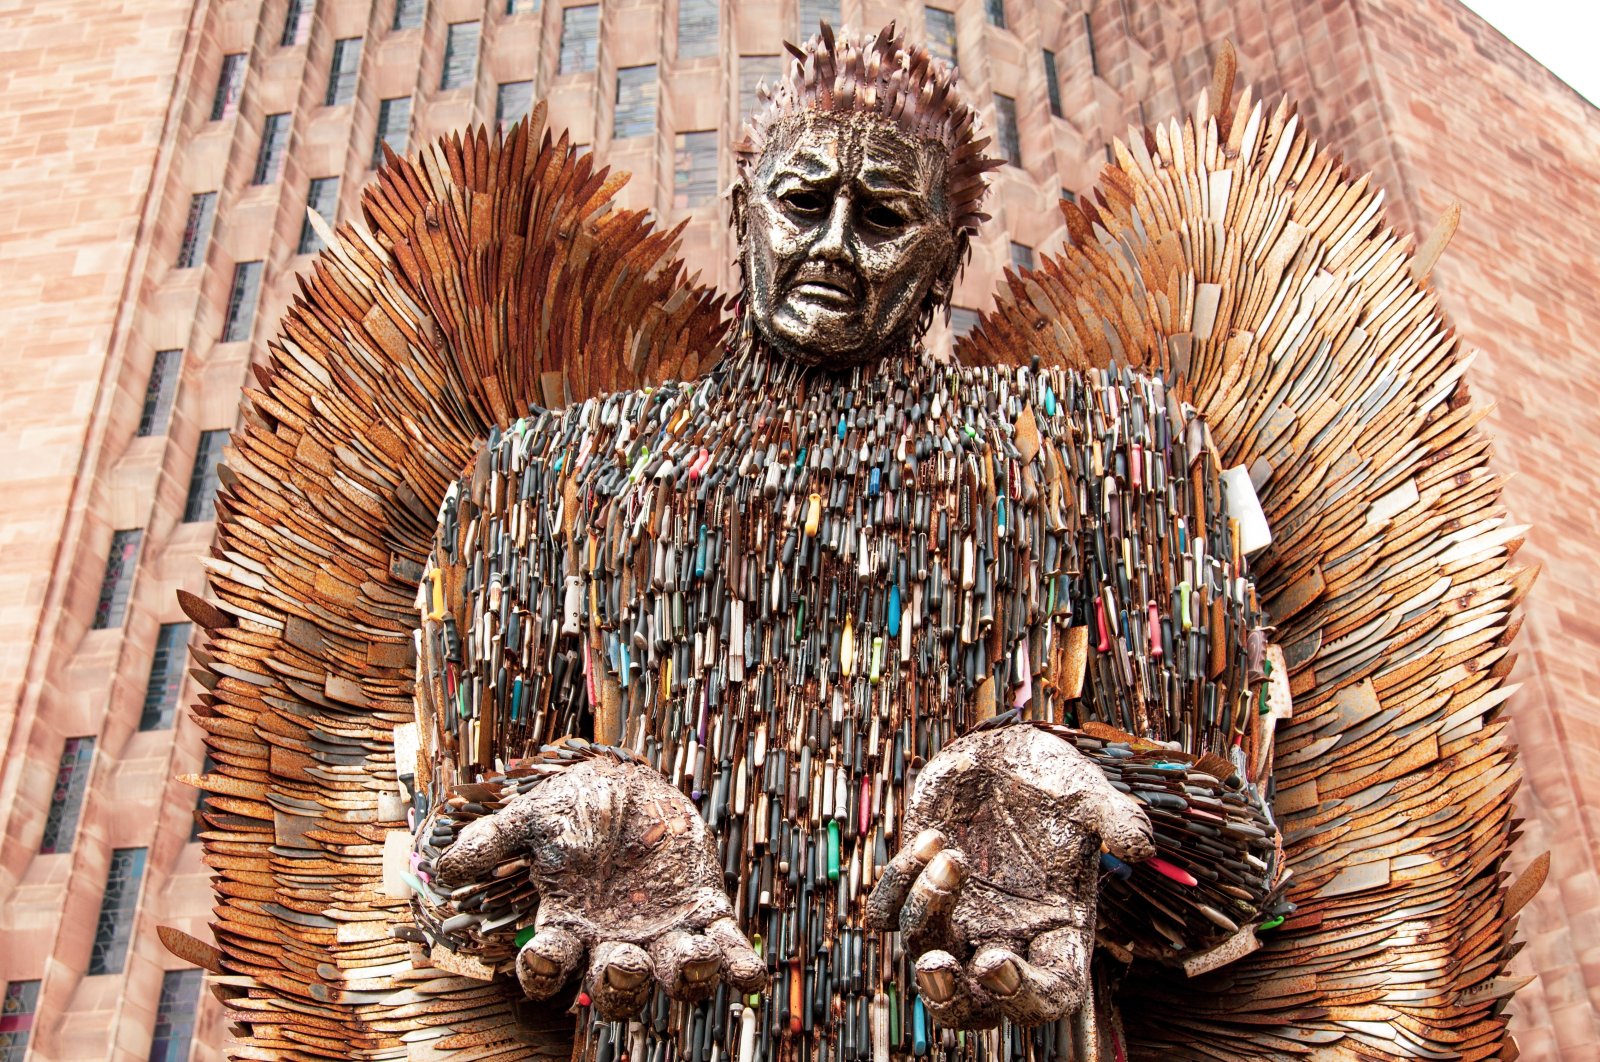 The Knife Angel in Victoria Square, which represents Birmingham&#039;s determination to address knife crime. (ShutterStock)